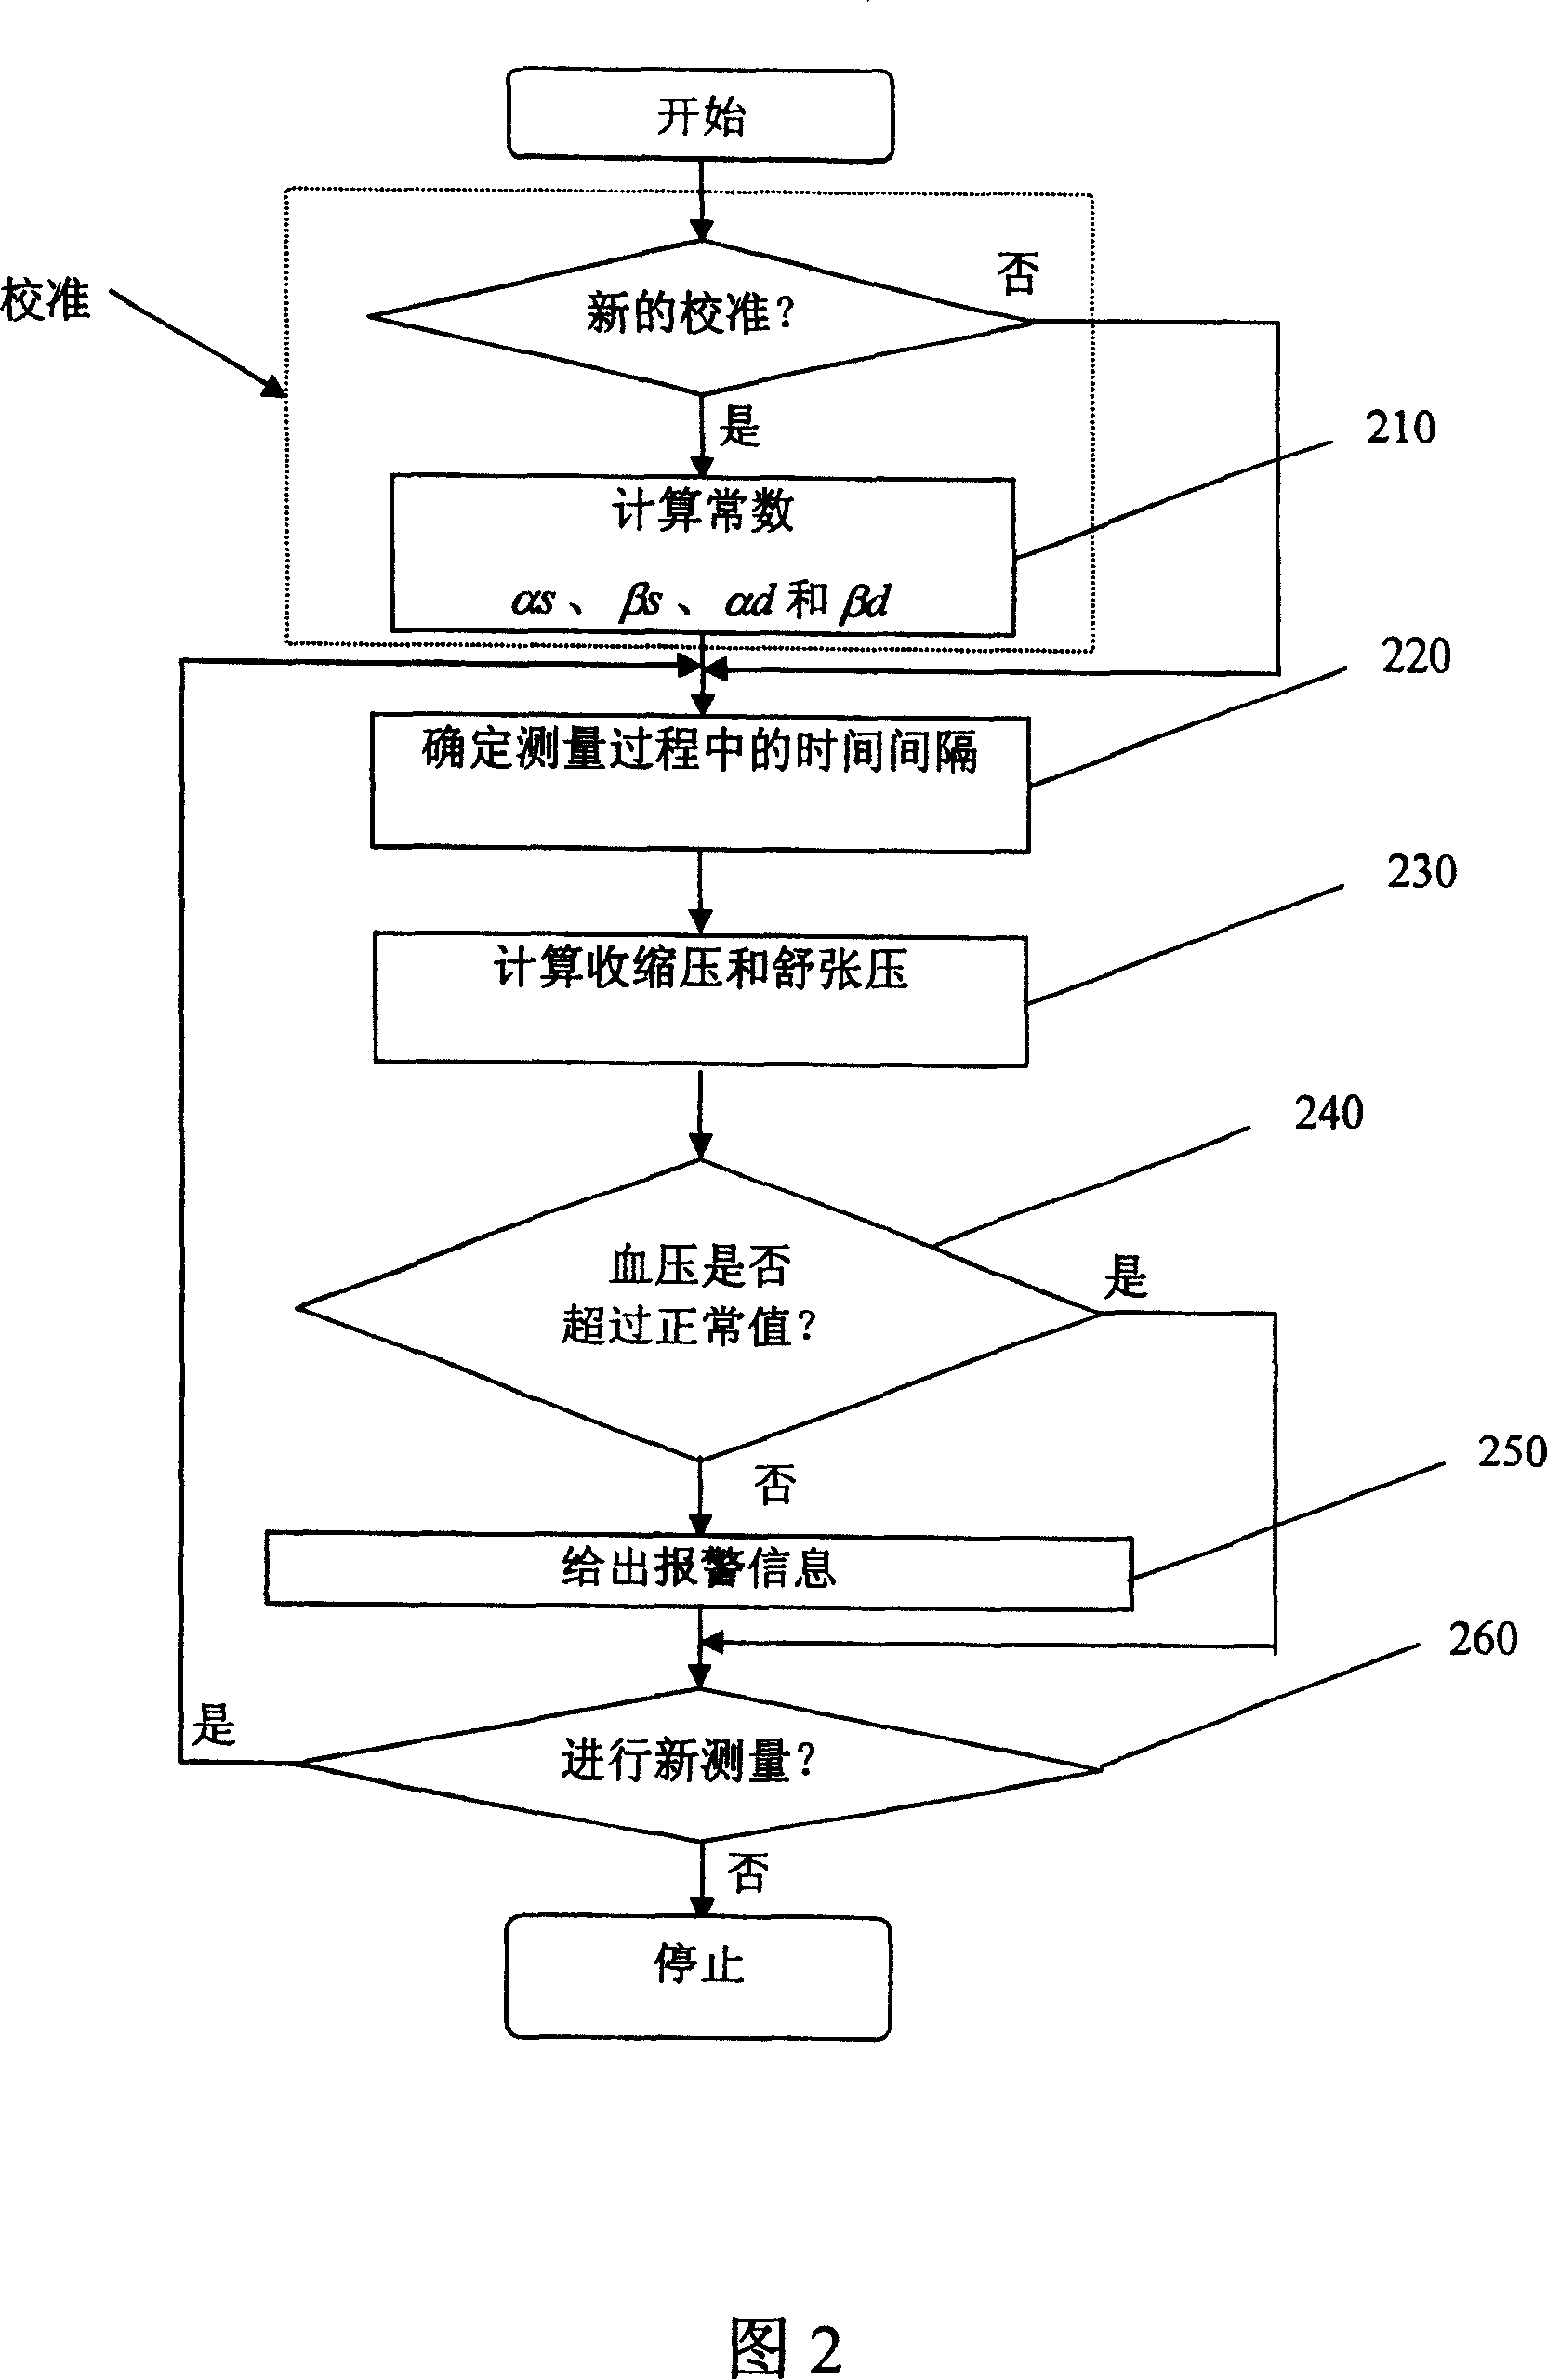 Blood pressure measuring device and method based on the pulse information of radial artery